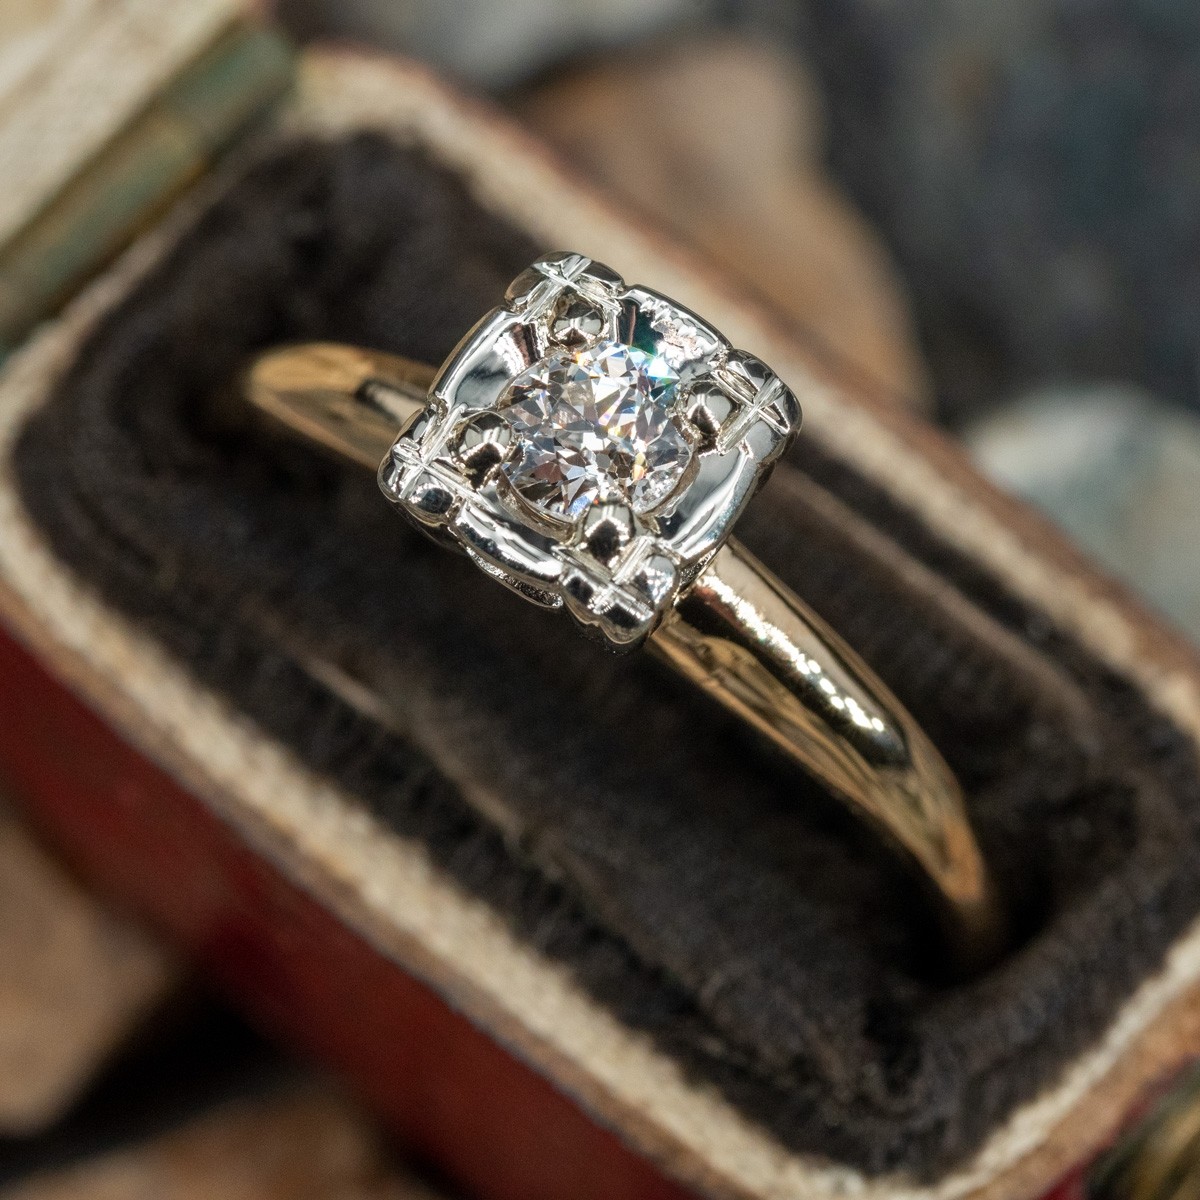 Euro Shank Engagement Rings and Square Wedding Rings